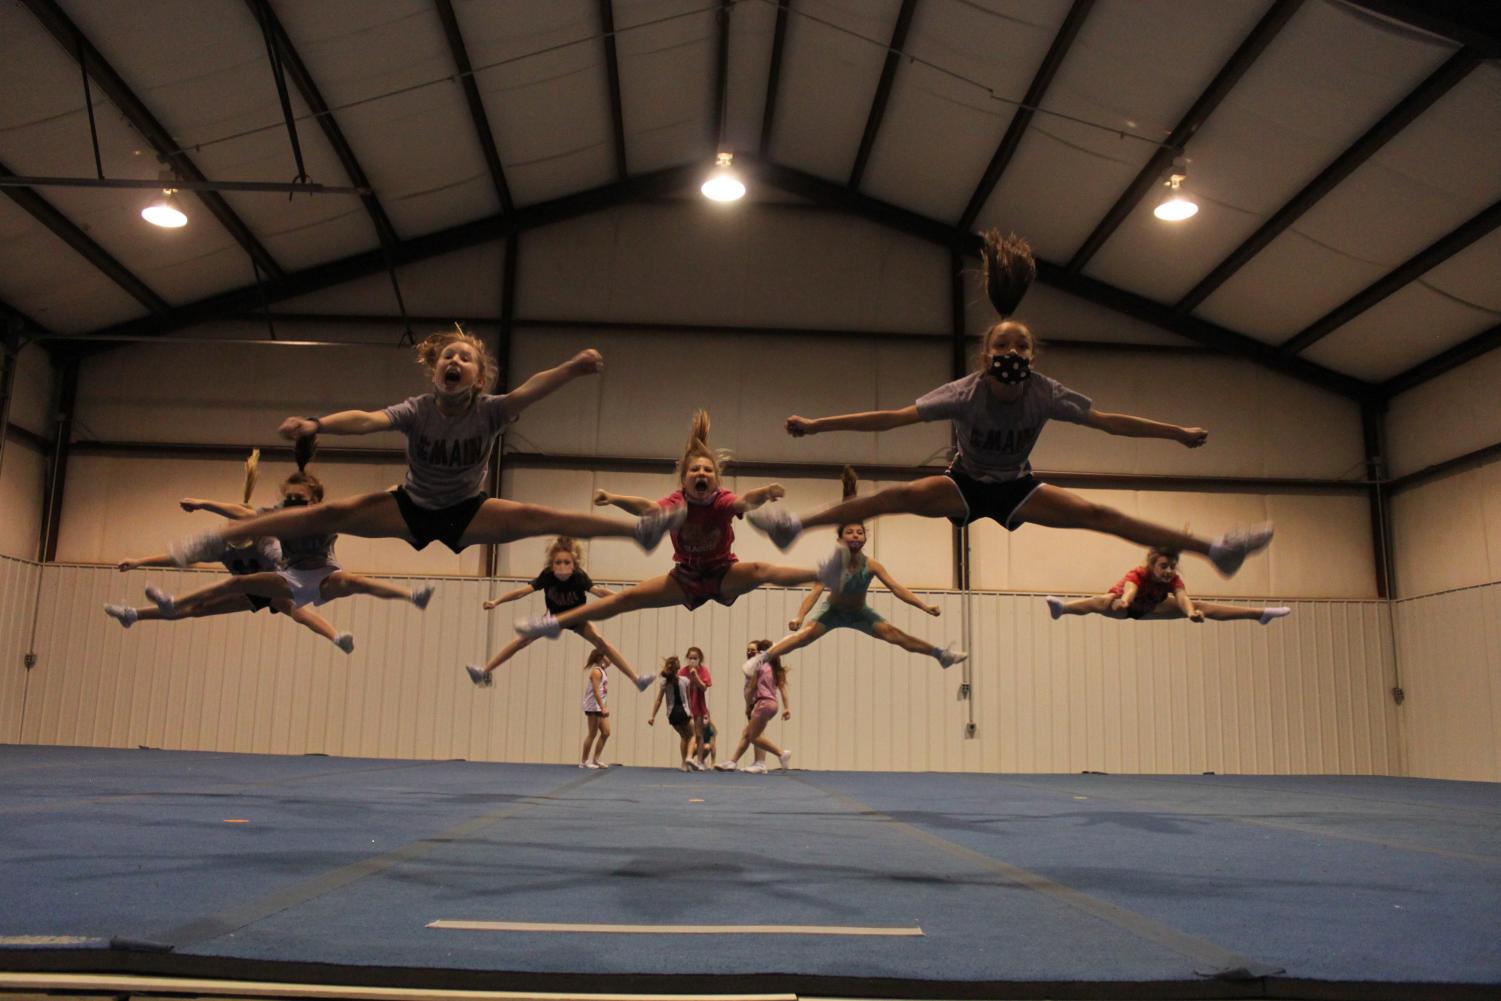 Cheer+Practice+During+COVID